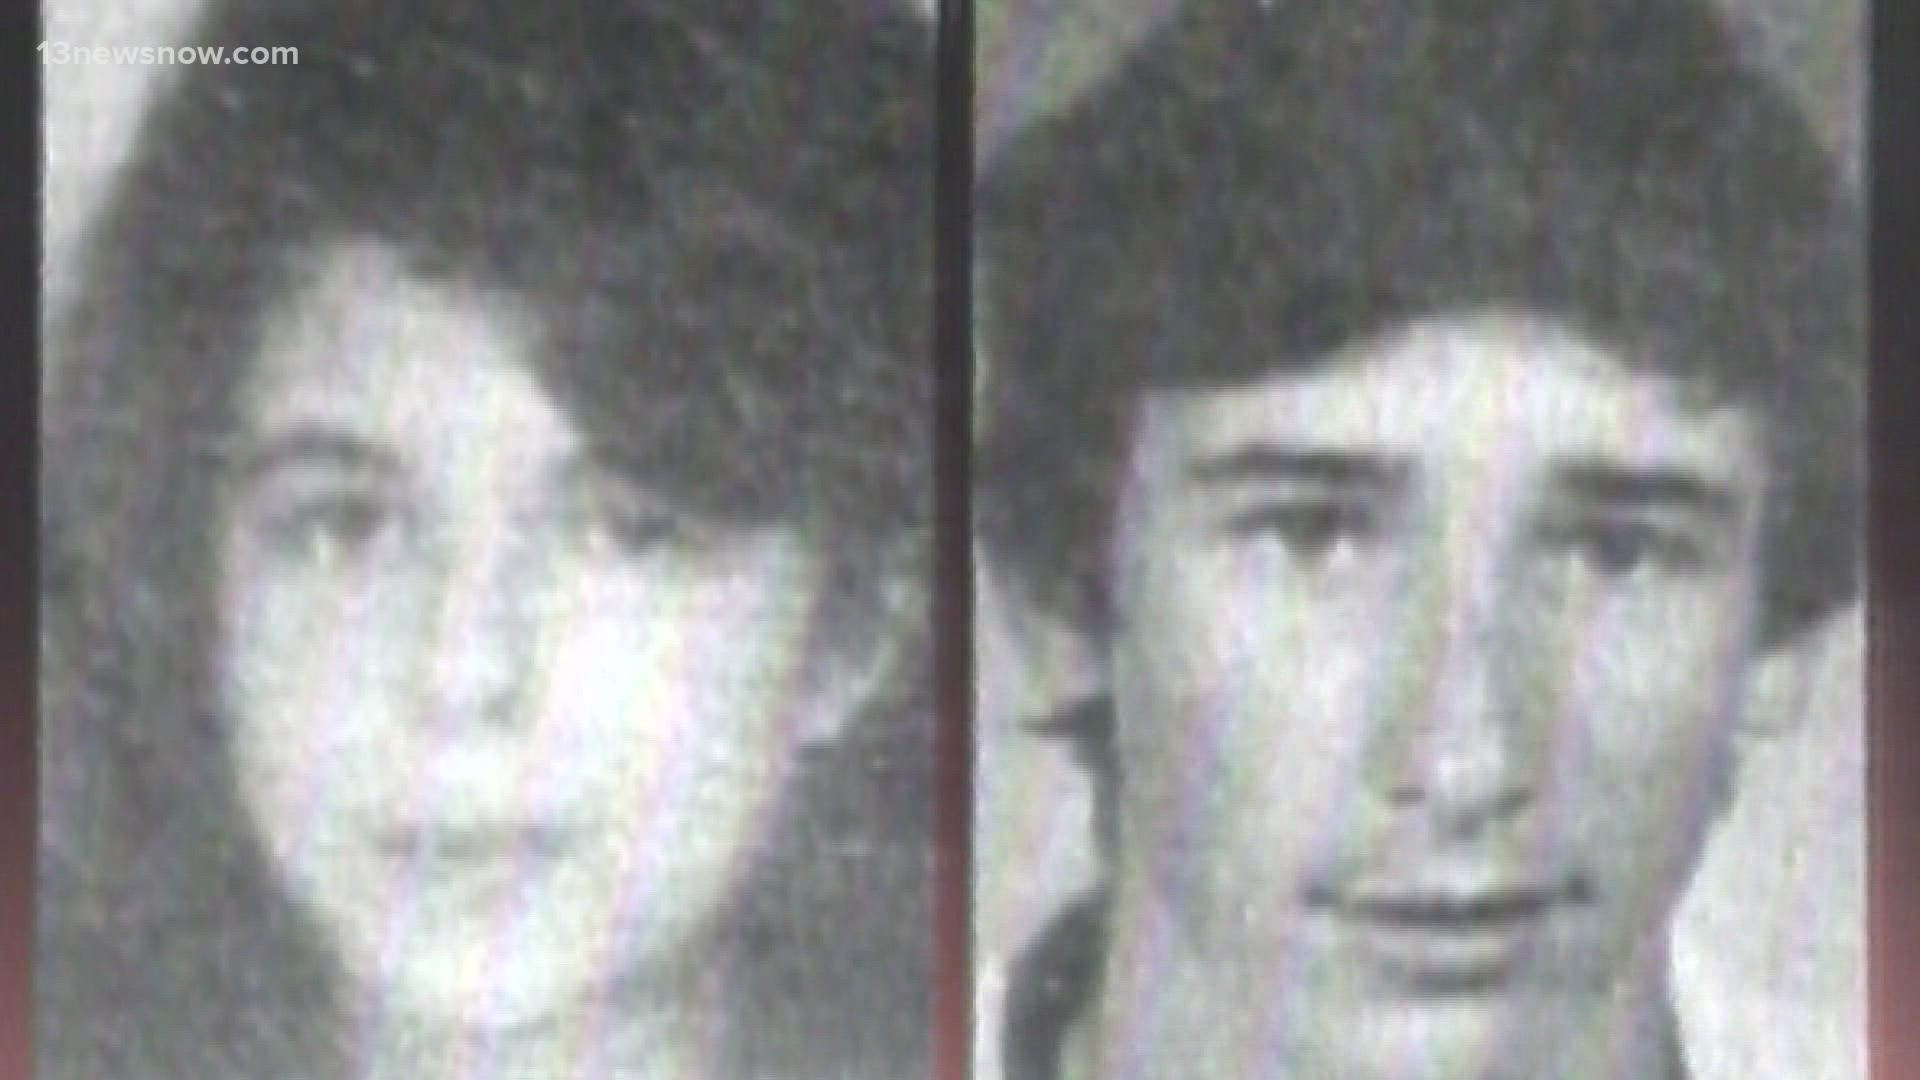 In 1987, a beachcomber in Isle of Wight County made a gruesome discovery: the bodies of two young victims.